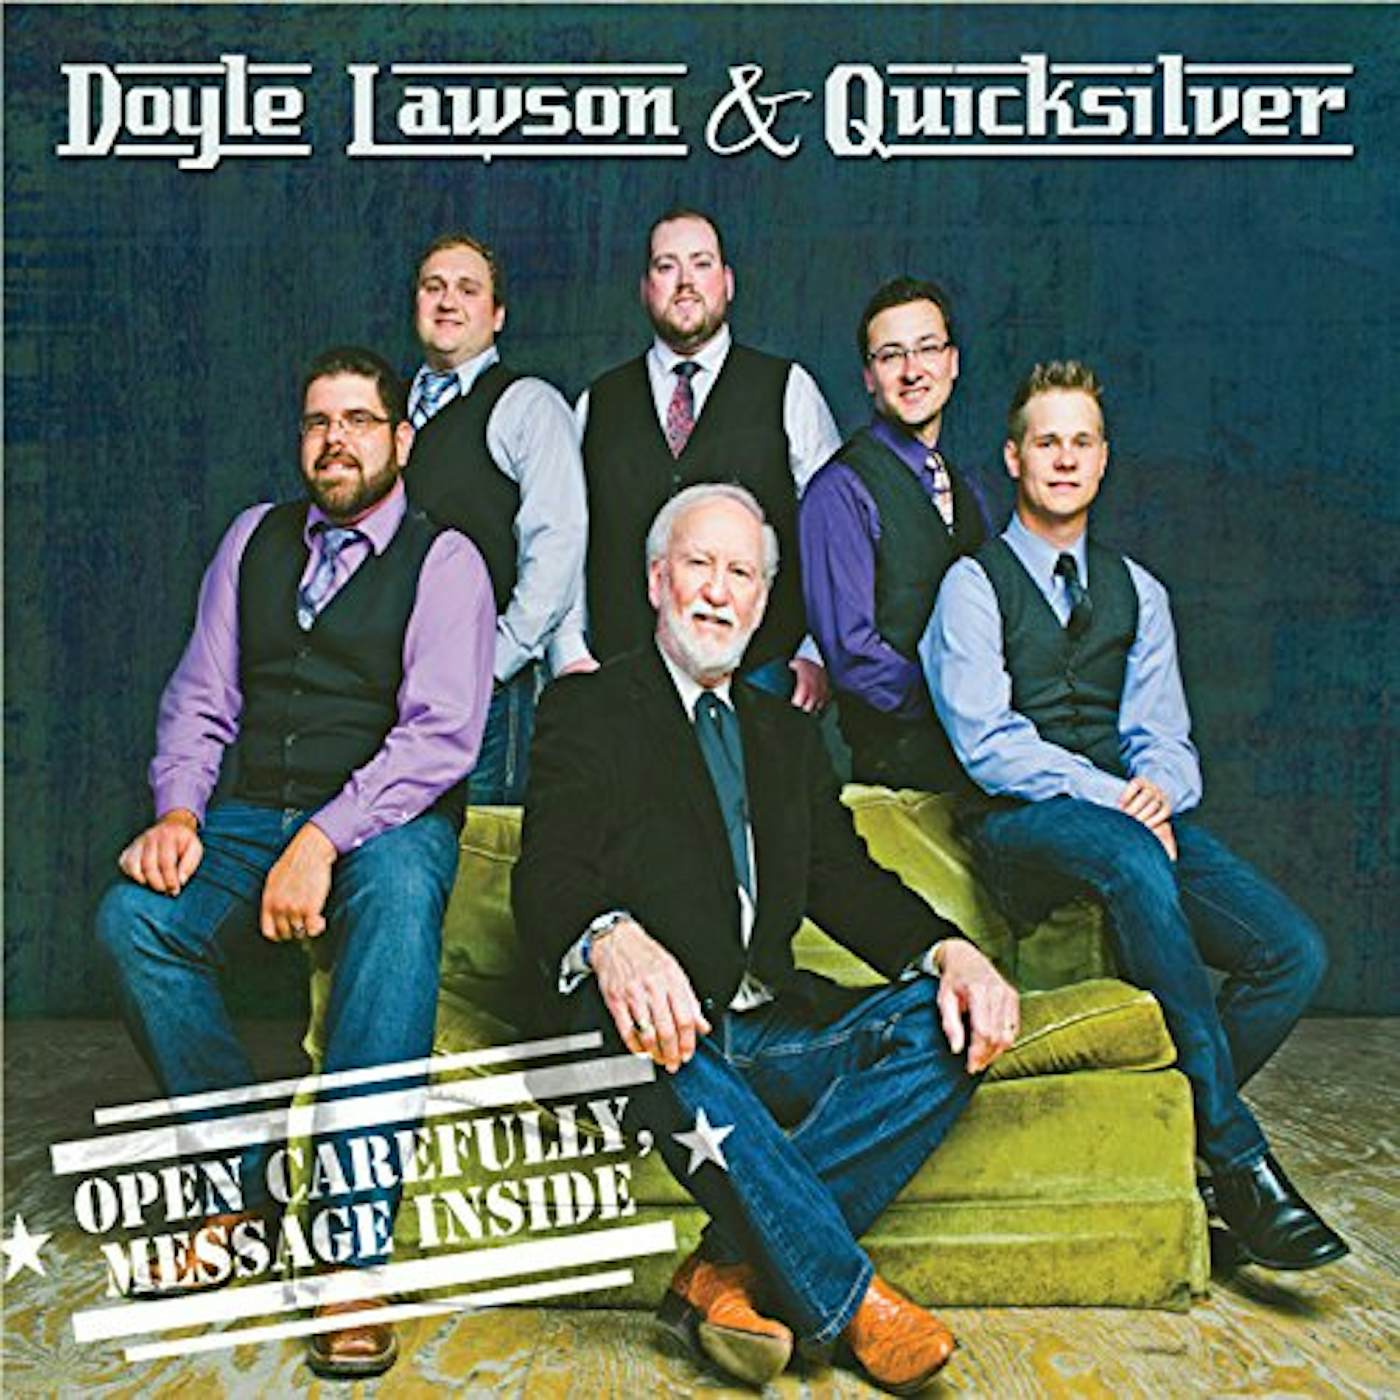 Doyle Lawson & Quicksilver OPEN CAREFULLY: MESSAGE INSIDE CD